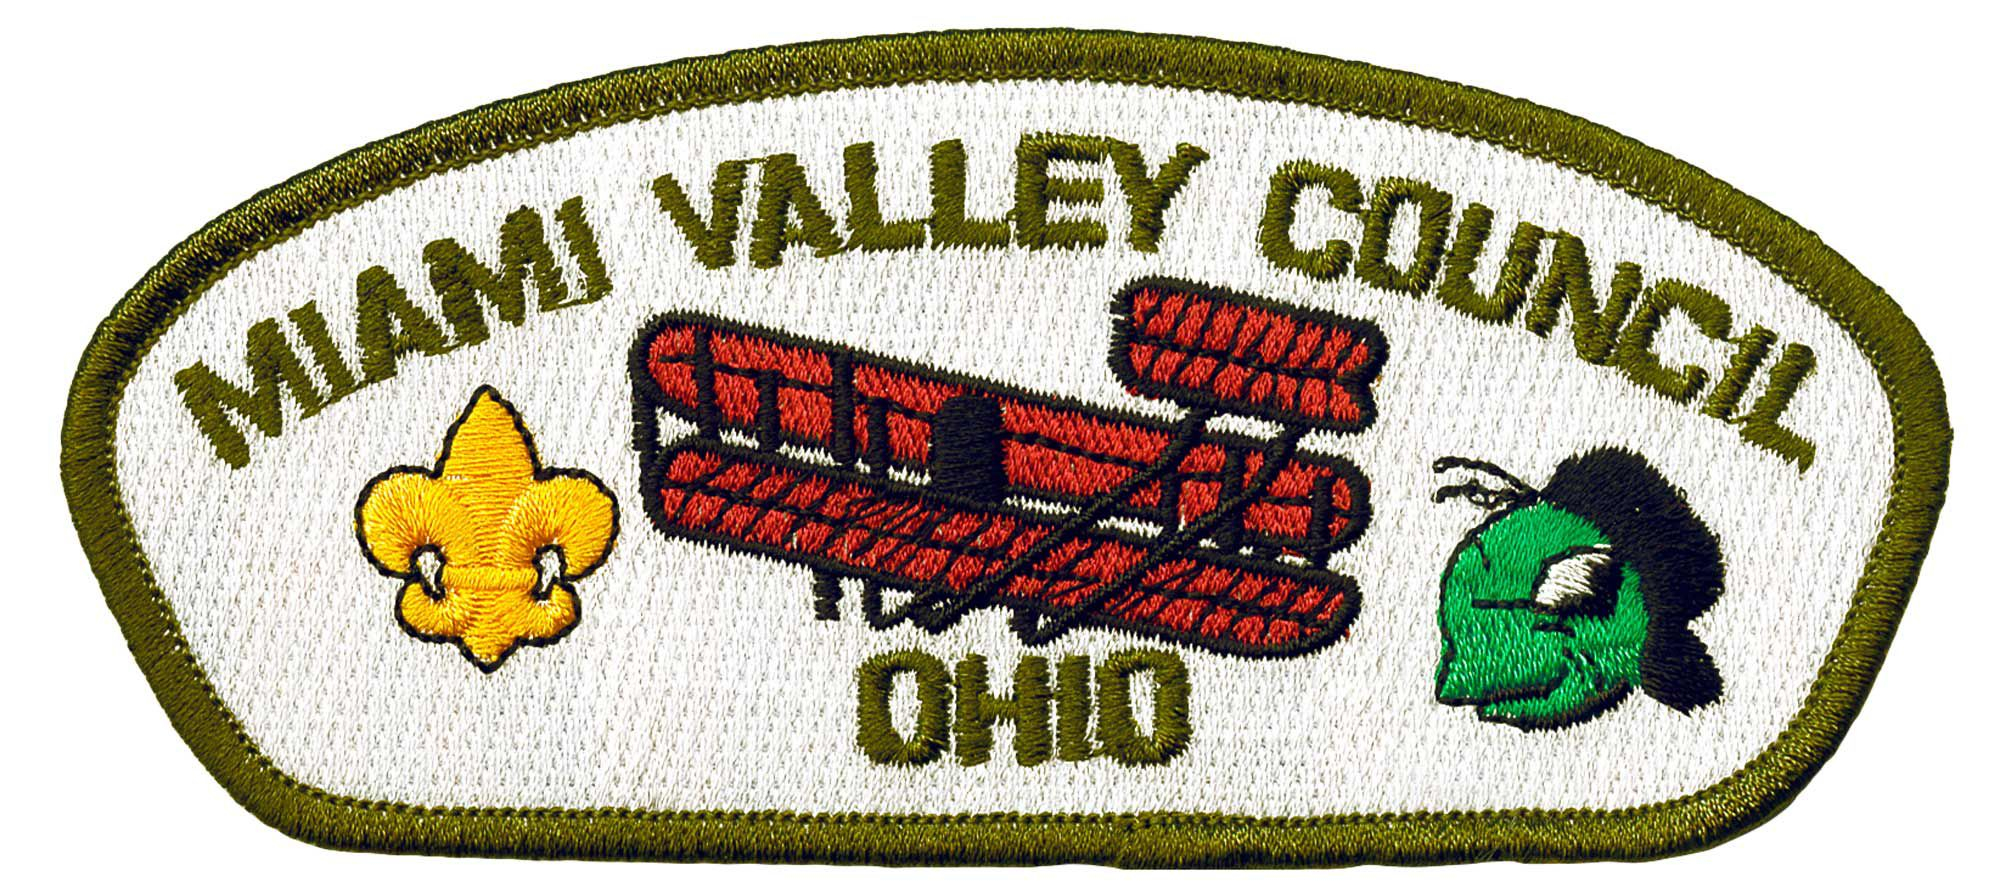 Details about   Boy Cub Scout Patch BSA Miami Valley Council Hooray for Heroes Adventure Weekend 